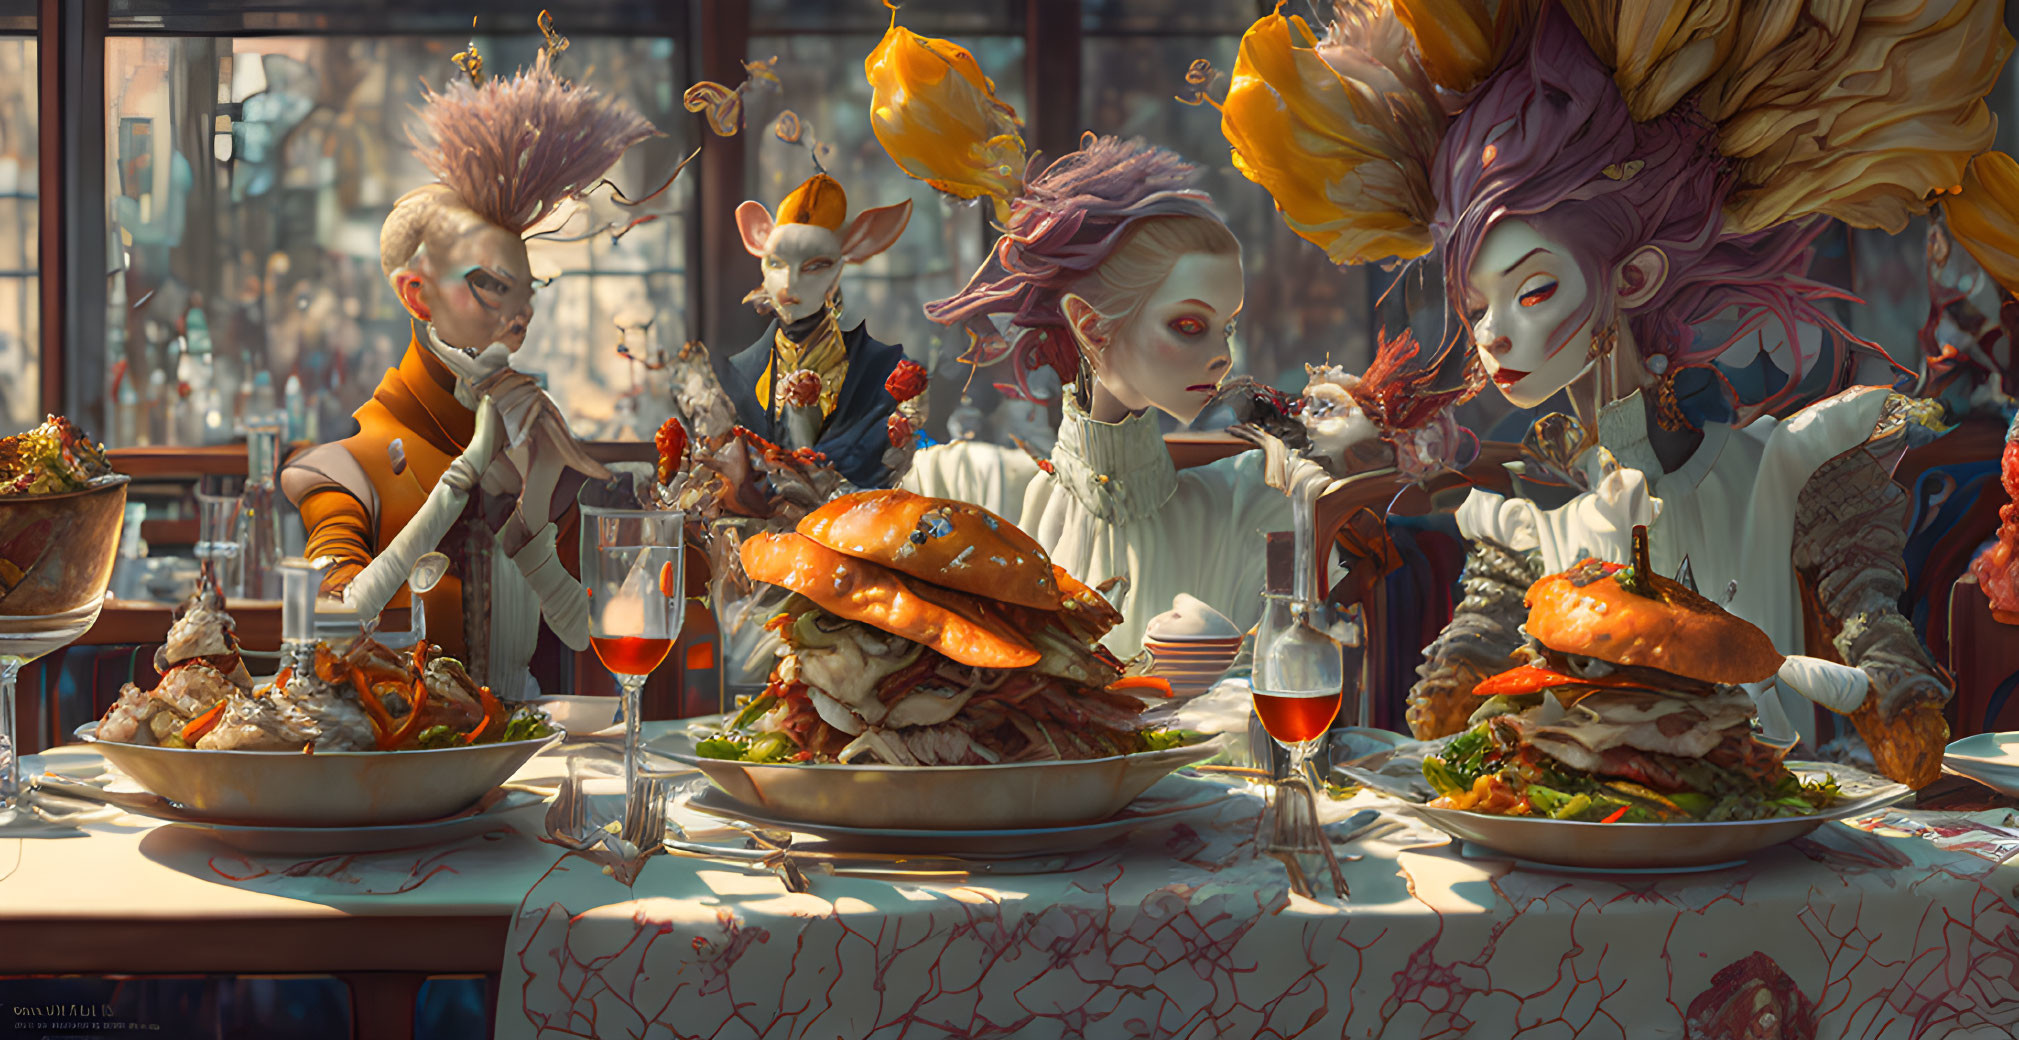 Opulent banquet scene with stylized characters in lavish attire